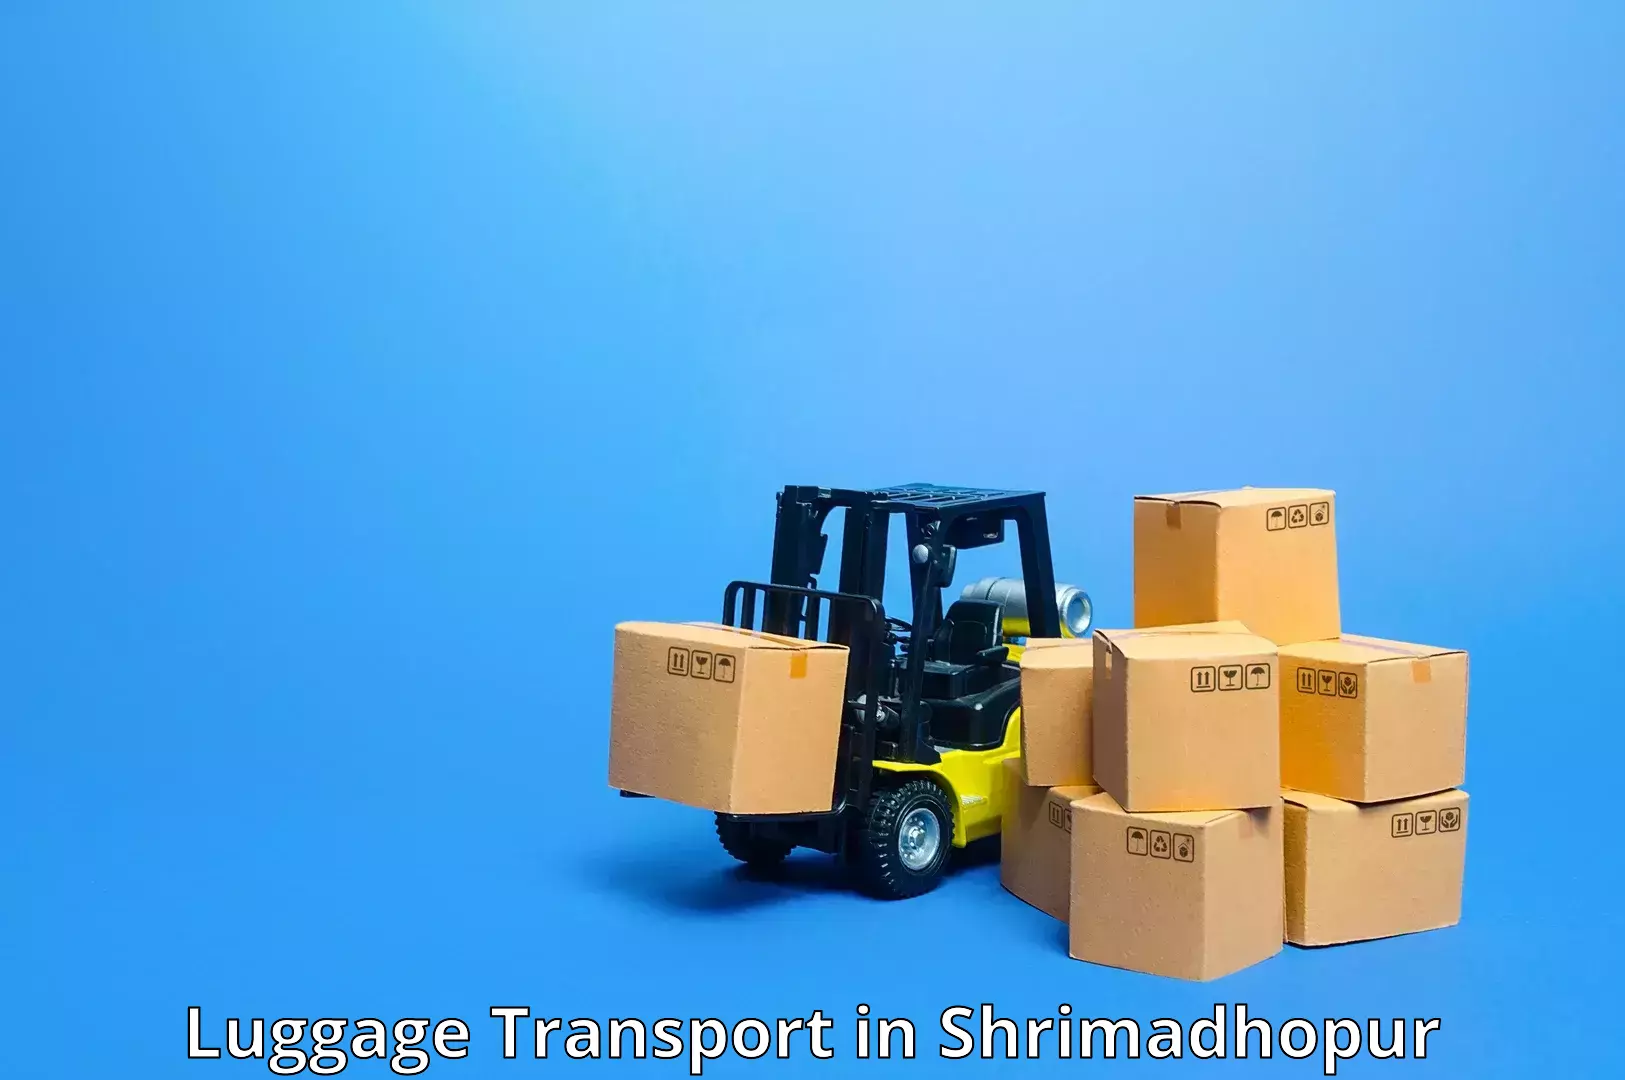 Tailored baggage transport in Shrimadhopur